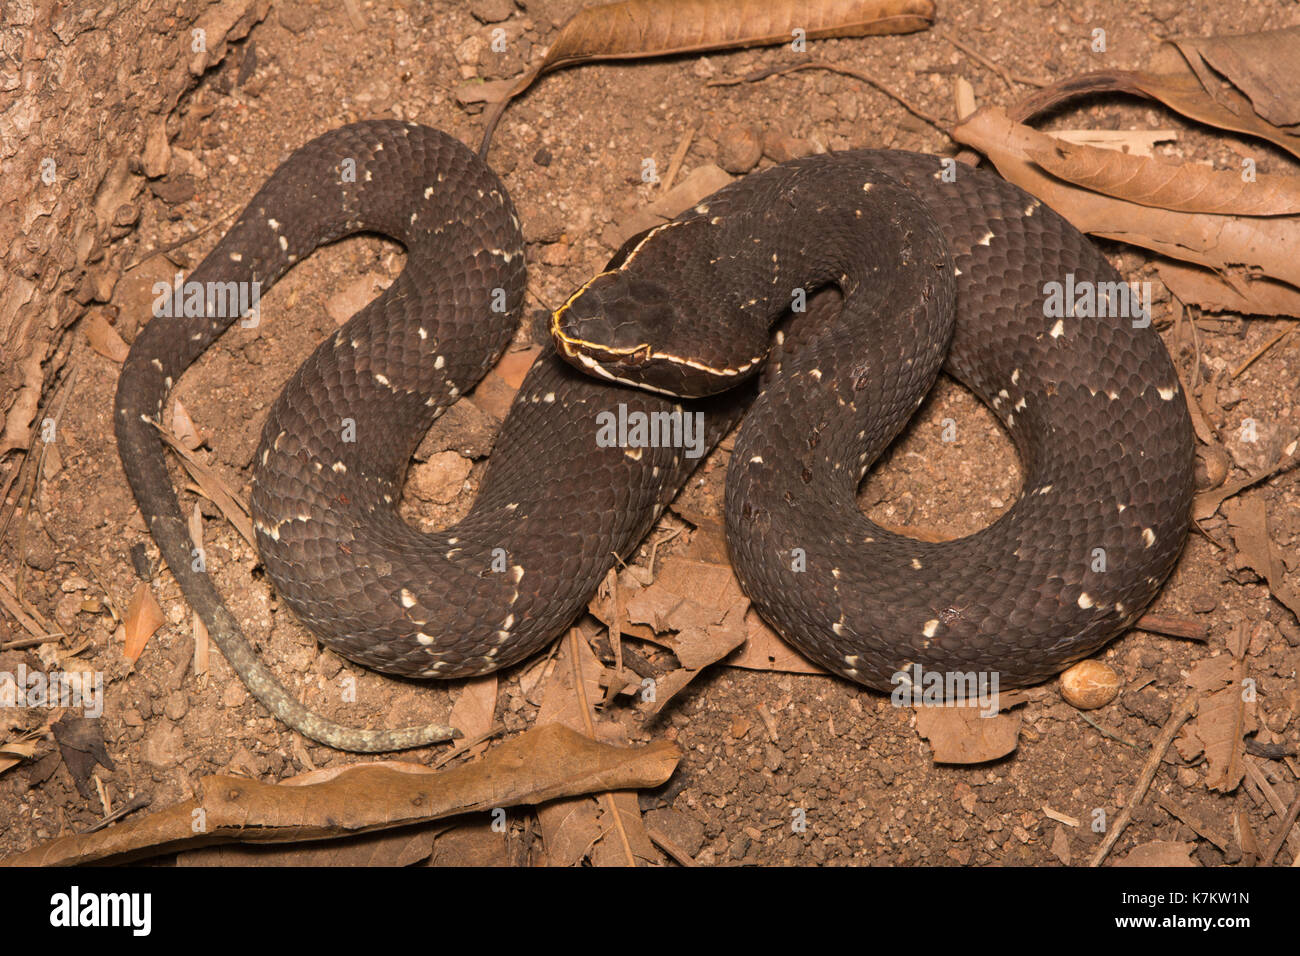 Common Cantil (Agkistrodon bilineatus) from Sonora, Mexico. Stock Photo